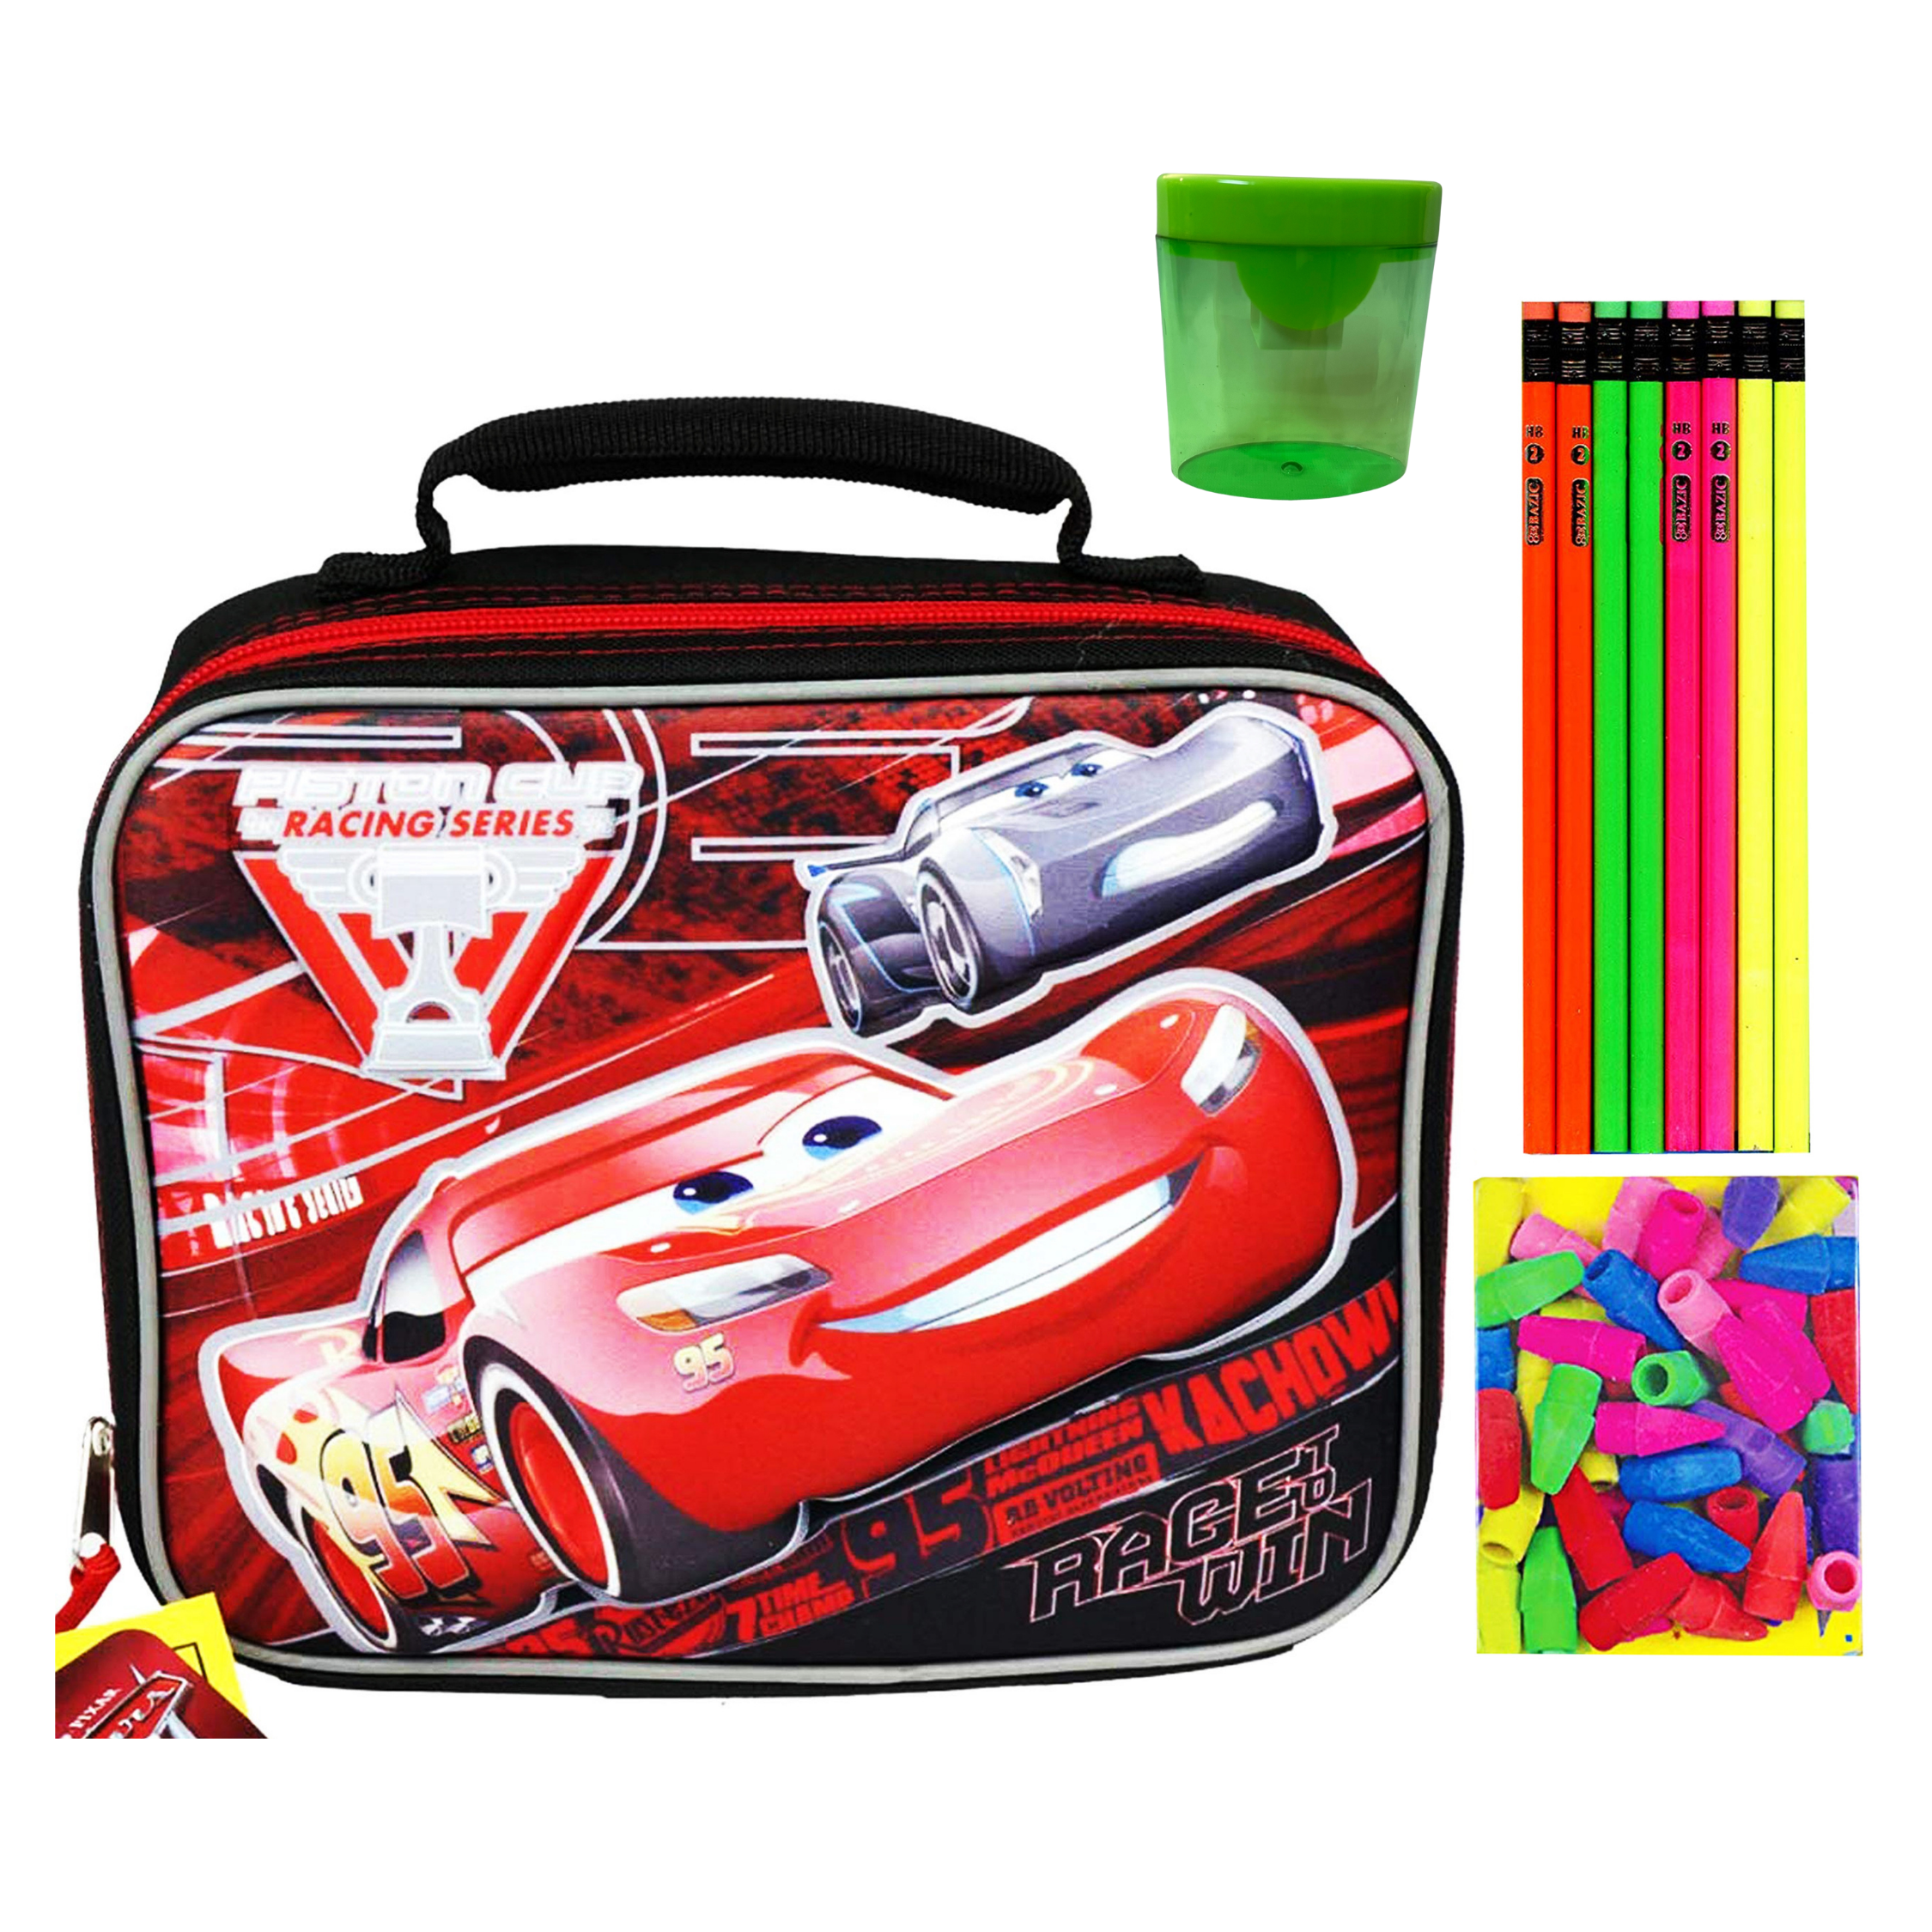 The Cars Lunch Bag No.95 McQueen Picnic Food Storage Cooler School Lunch Bag Box